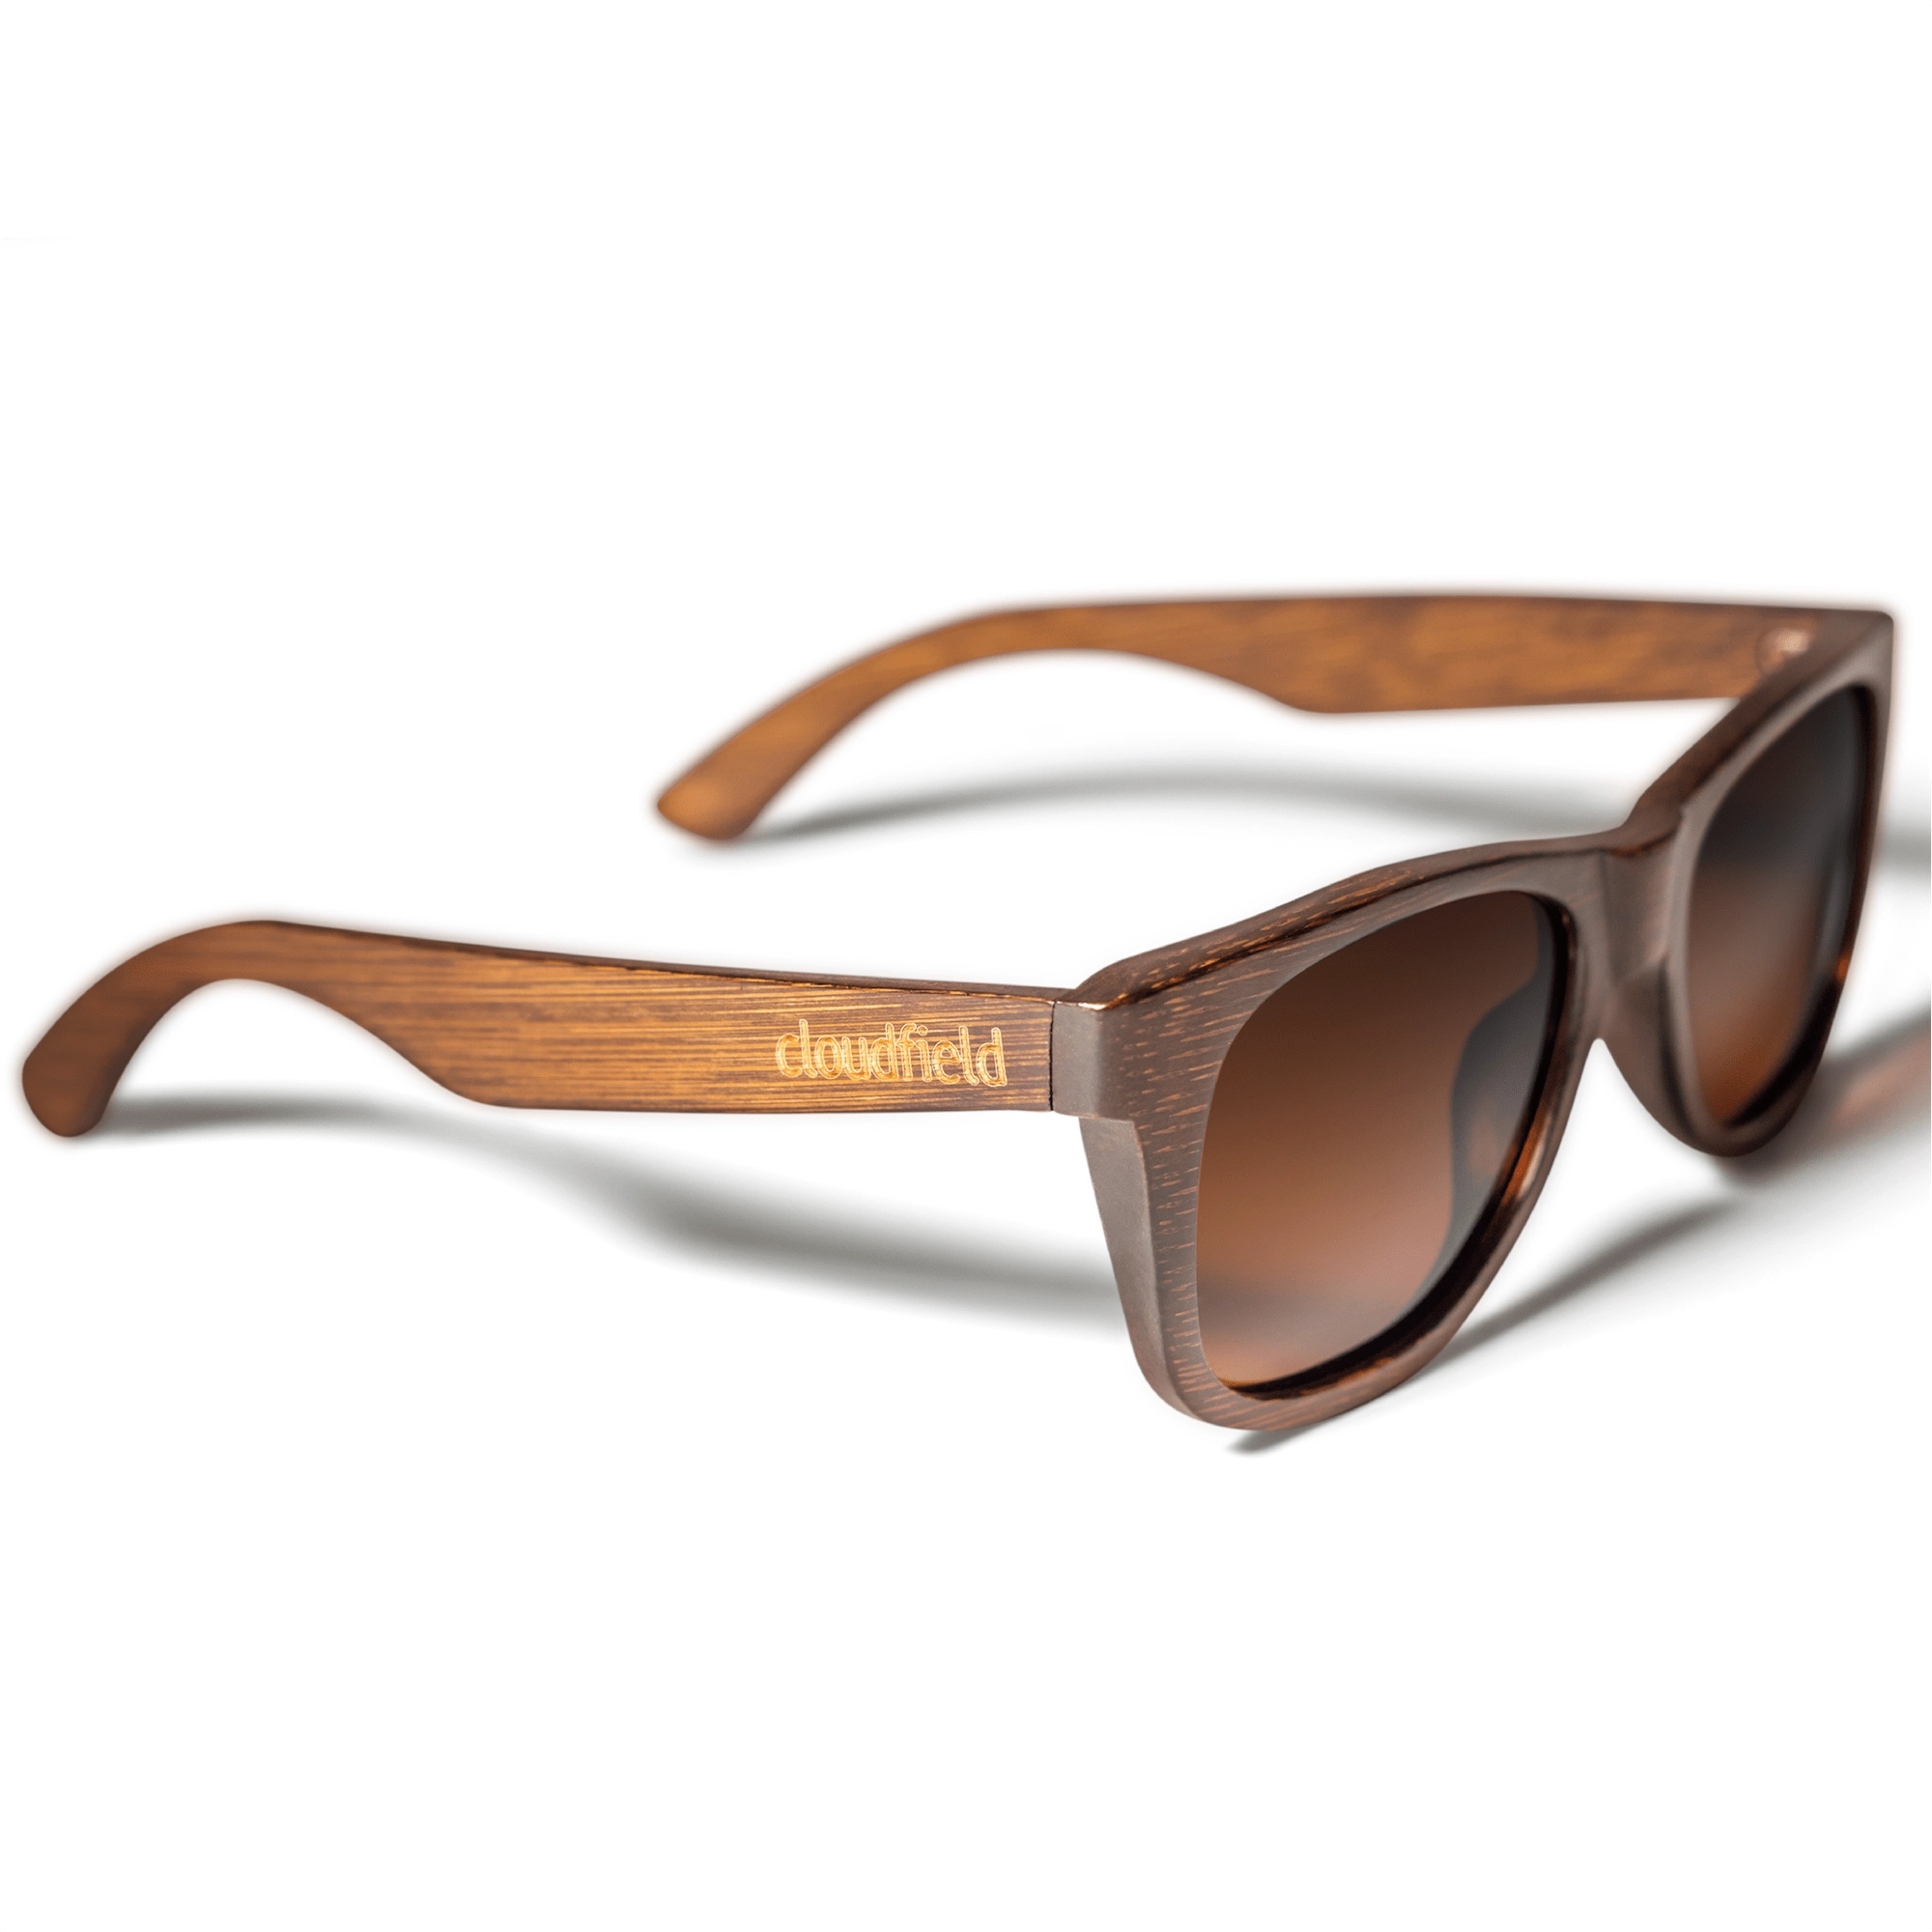 cloudfield brown polarized sunglasses